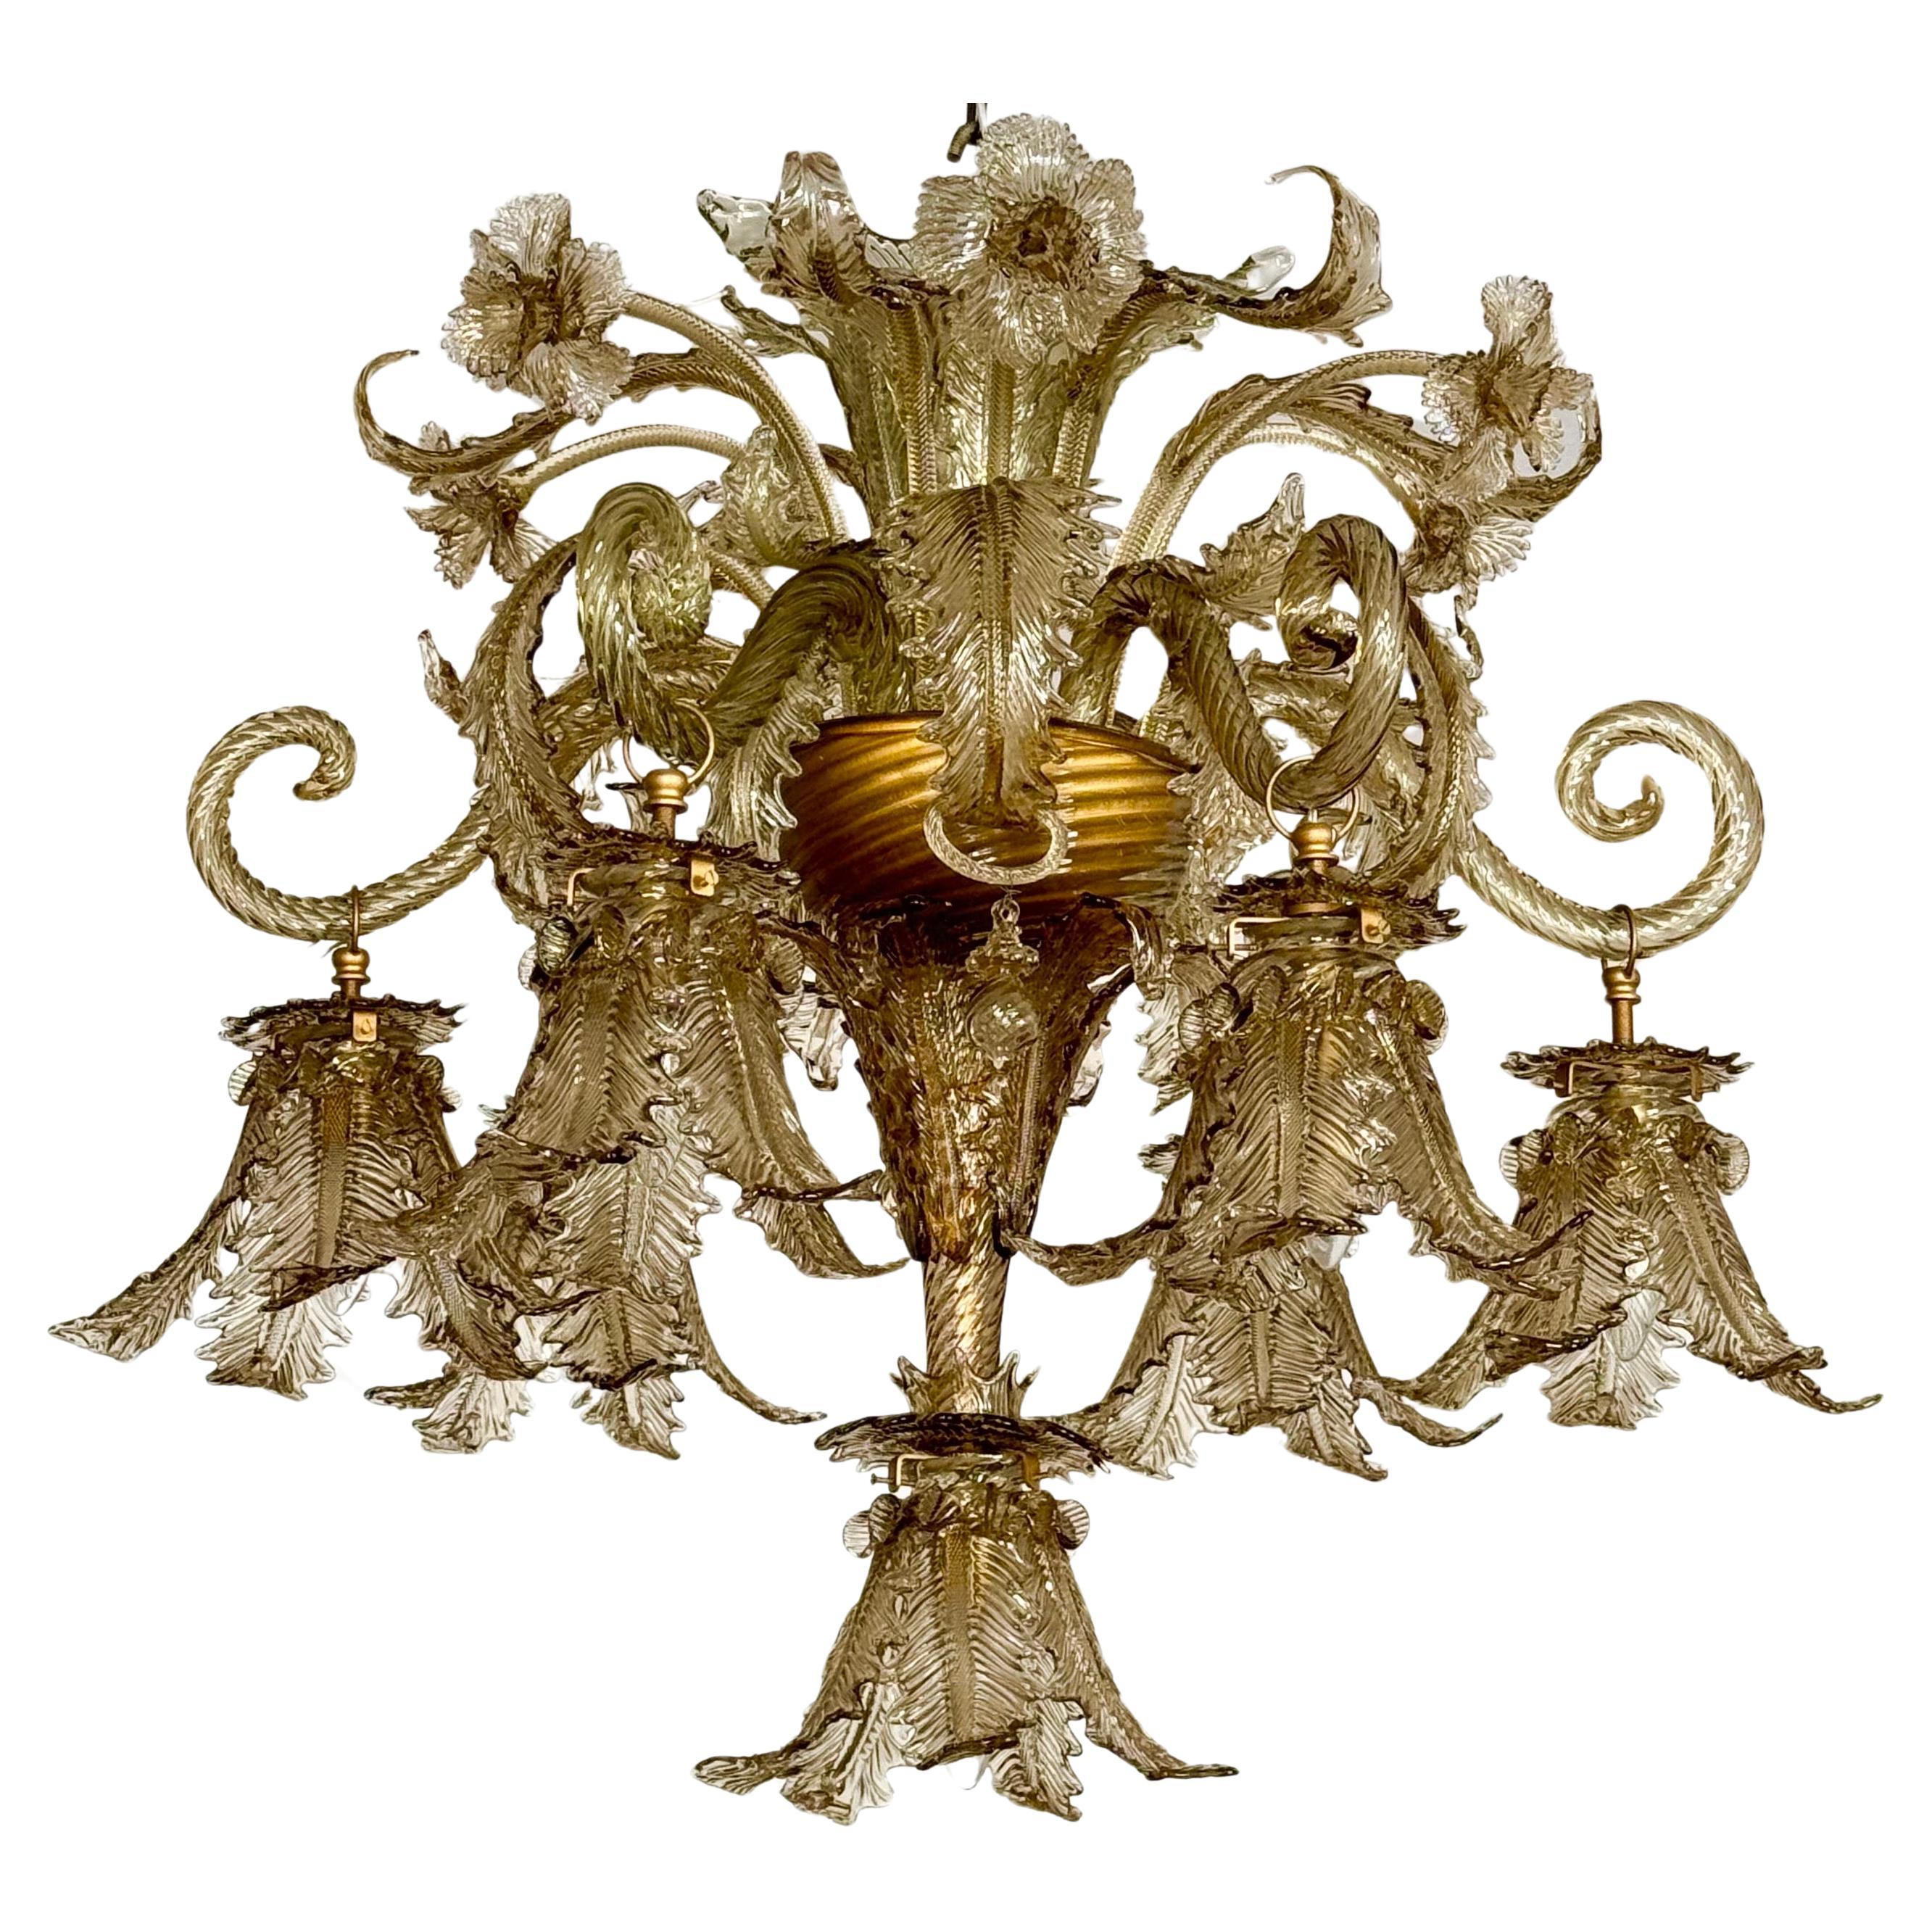  Exceptional Murano Glass Chandelier by Barovier Toso, Italy, 1940s For Sale